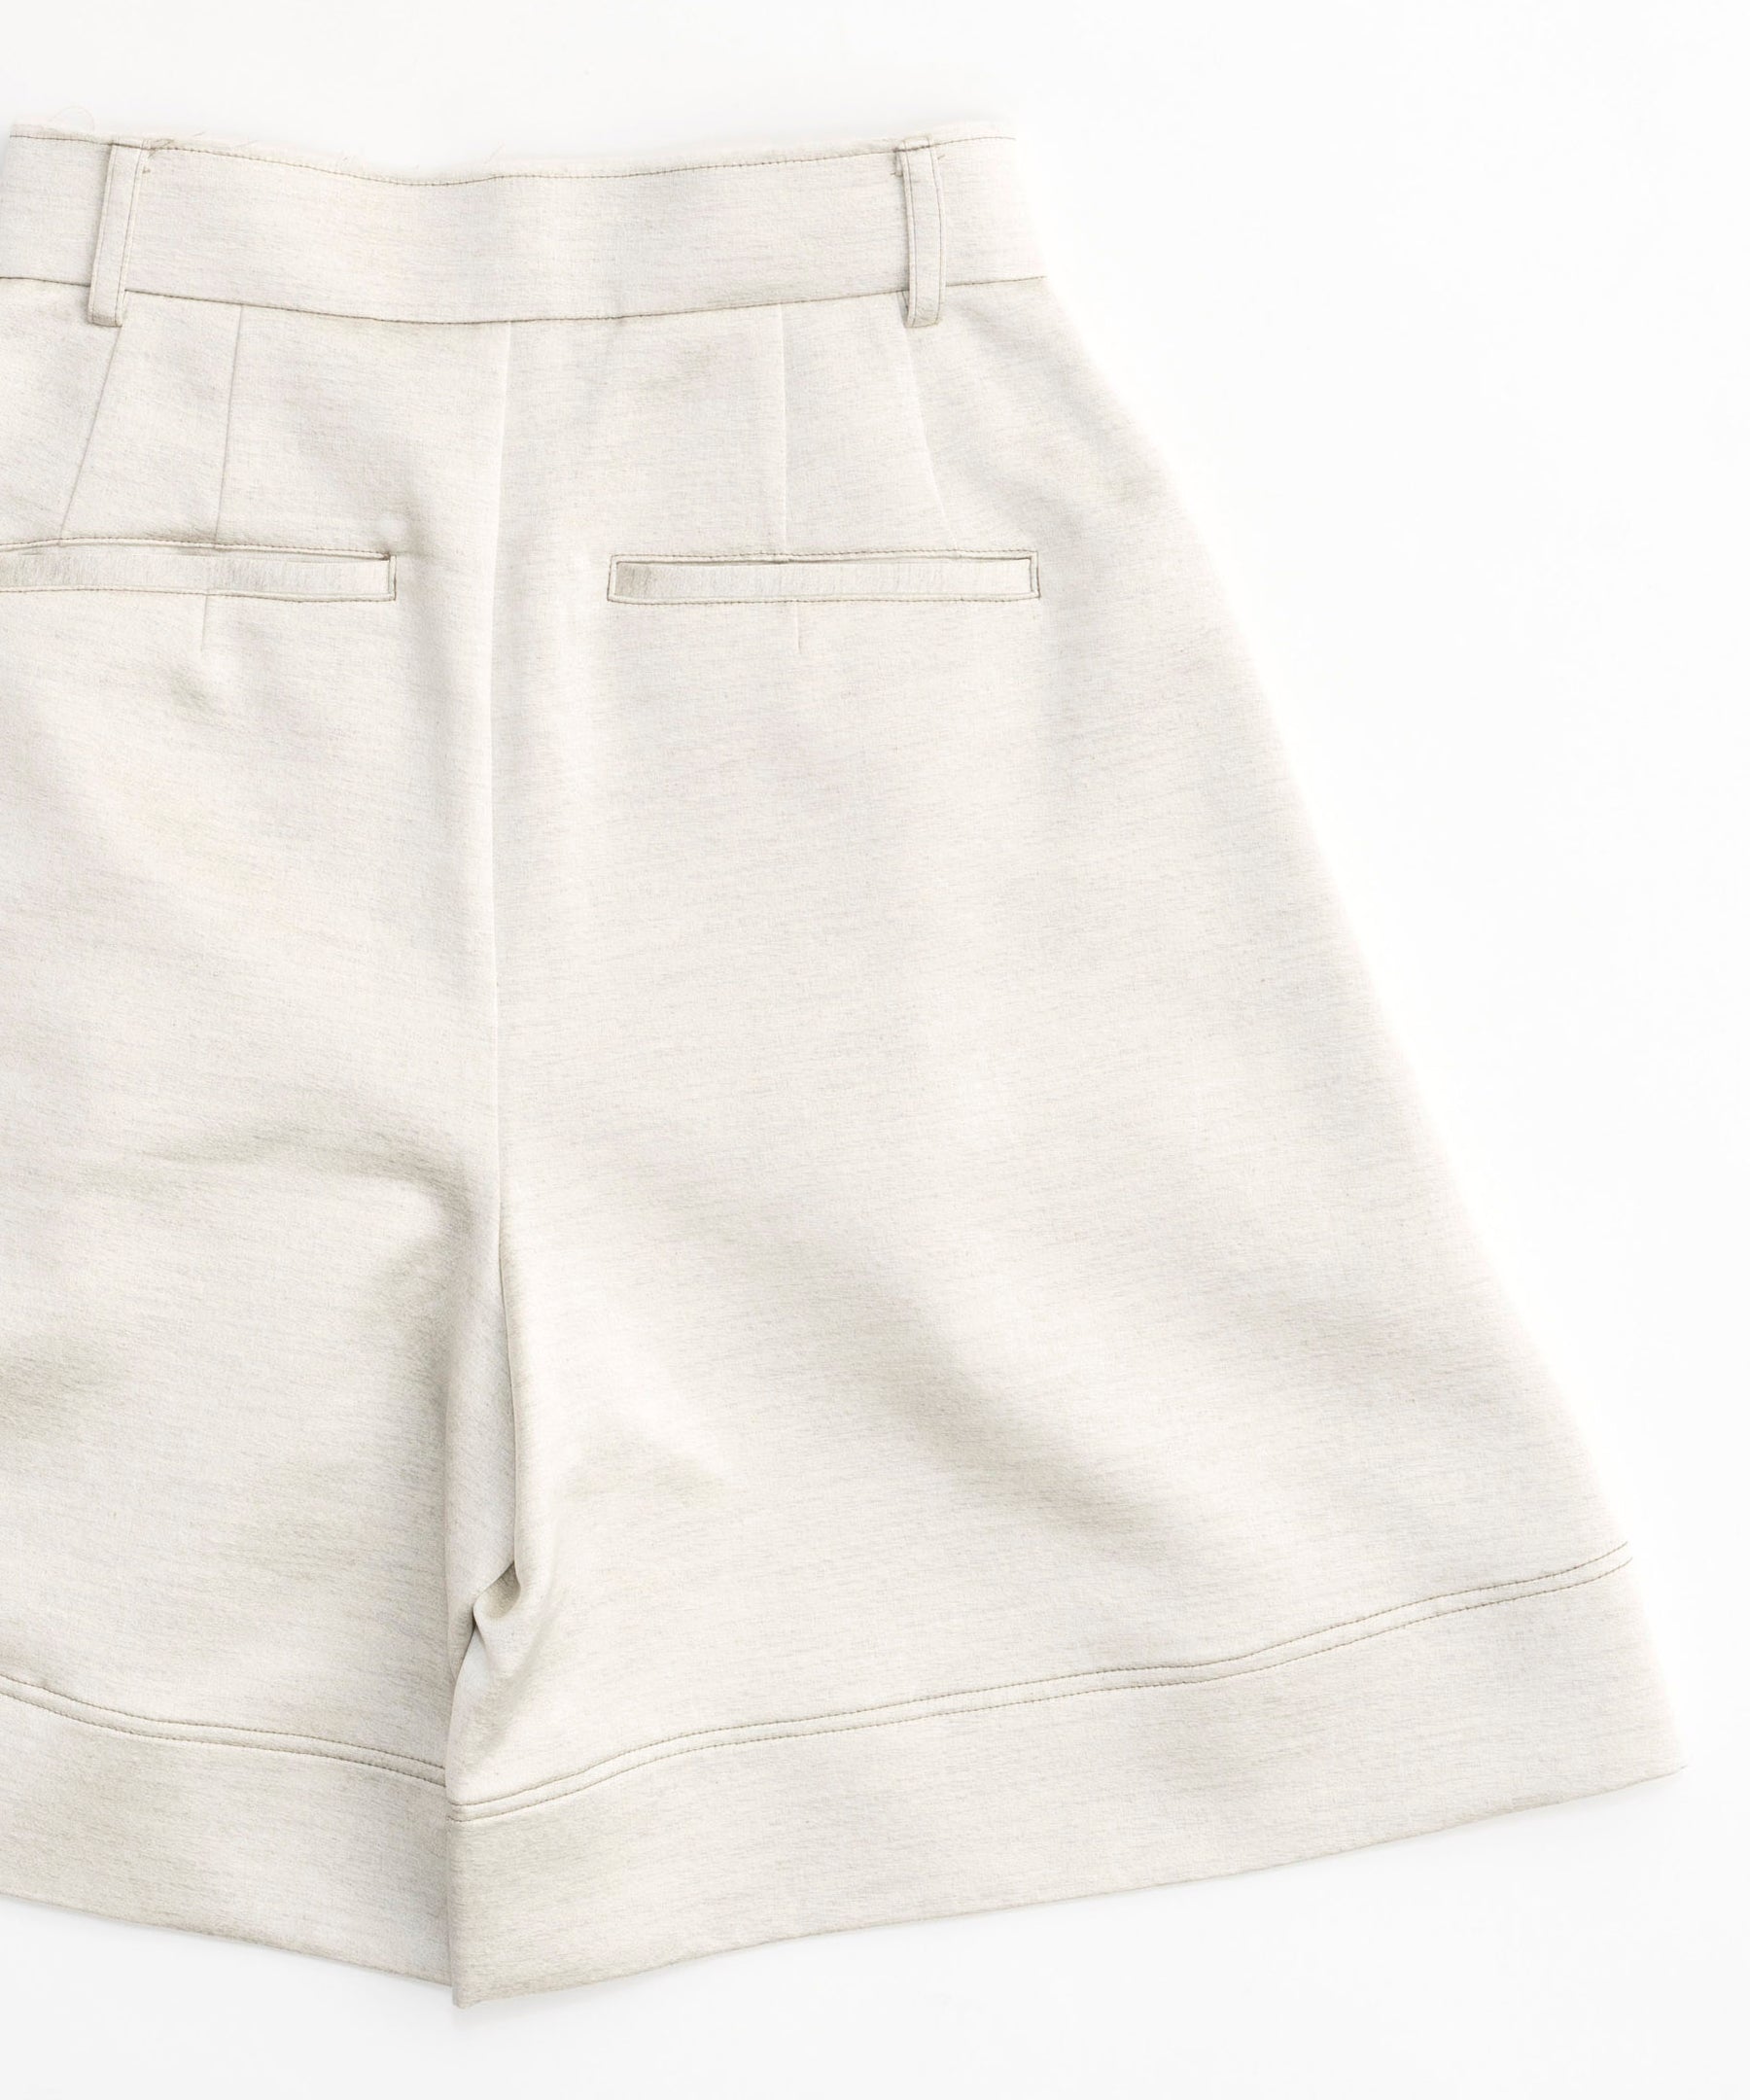 Wide Silhouette Shorts